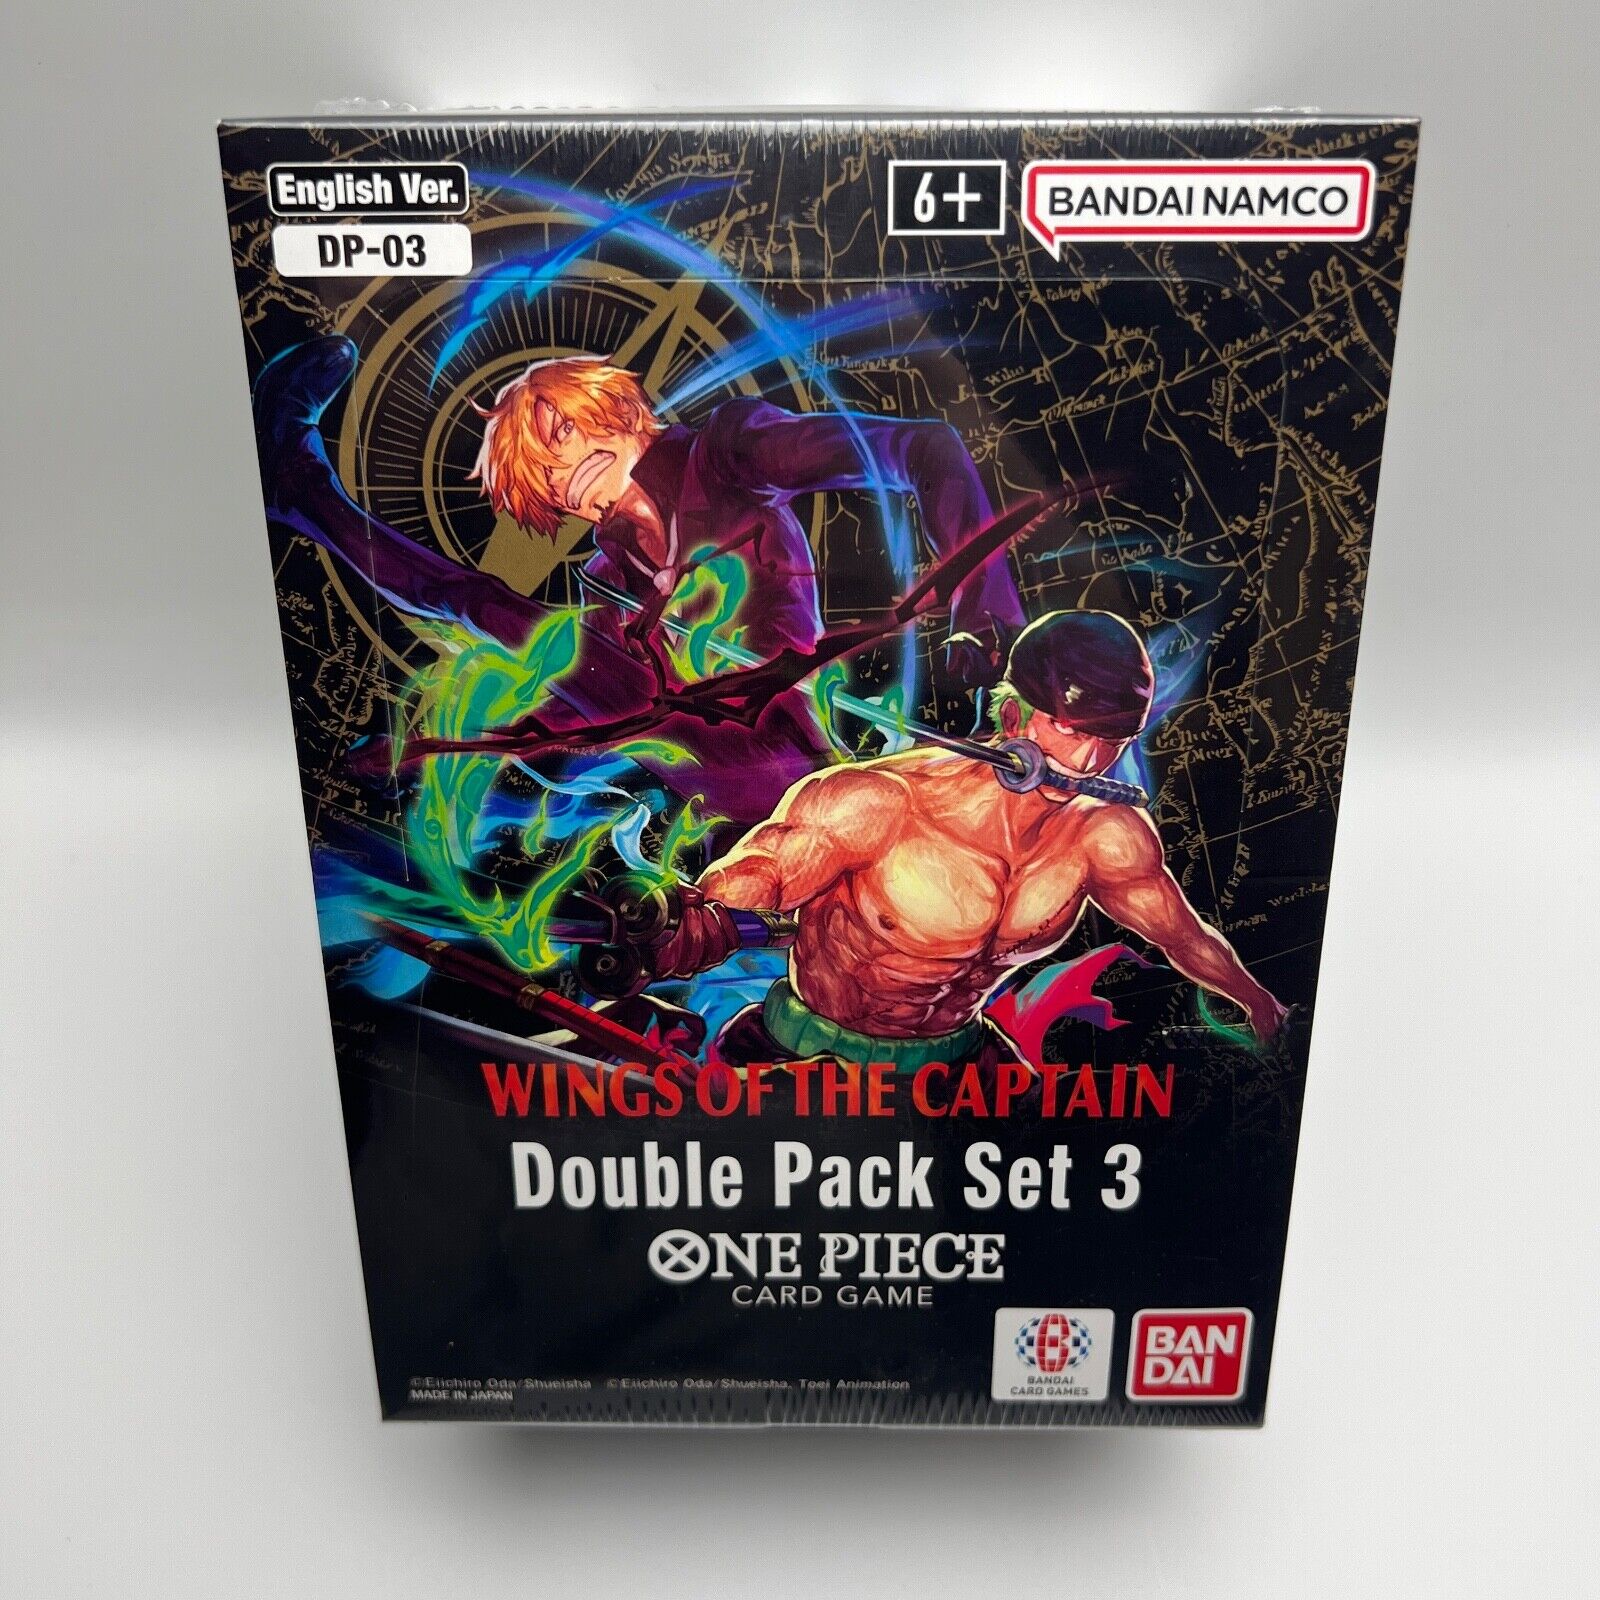 One Piece Card Game Wings of the Captain DP-03 Double Pack - OP-06 + DON SEALED